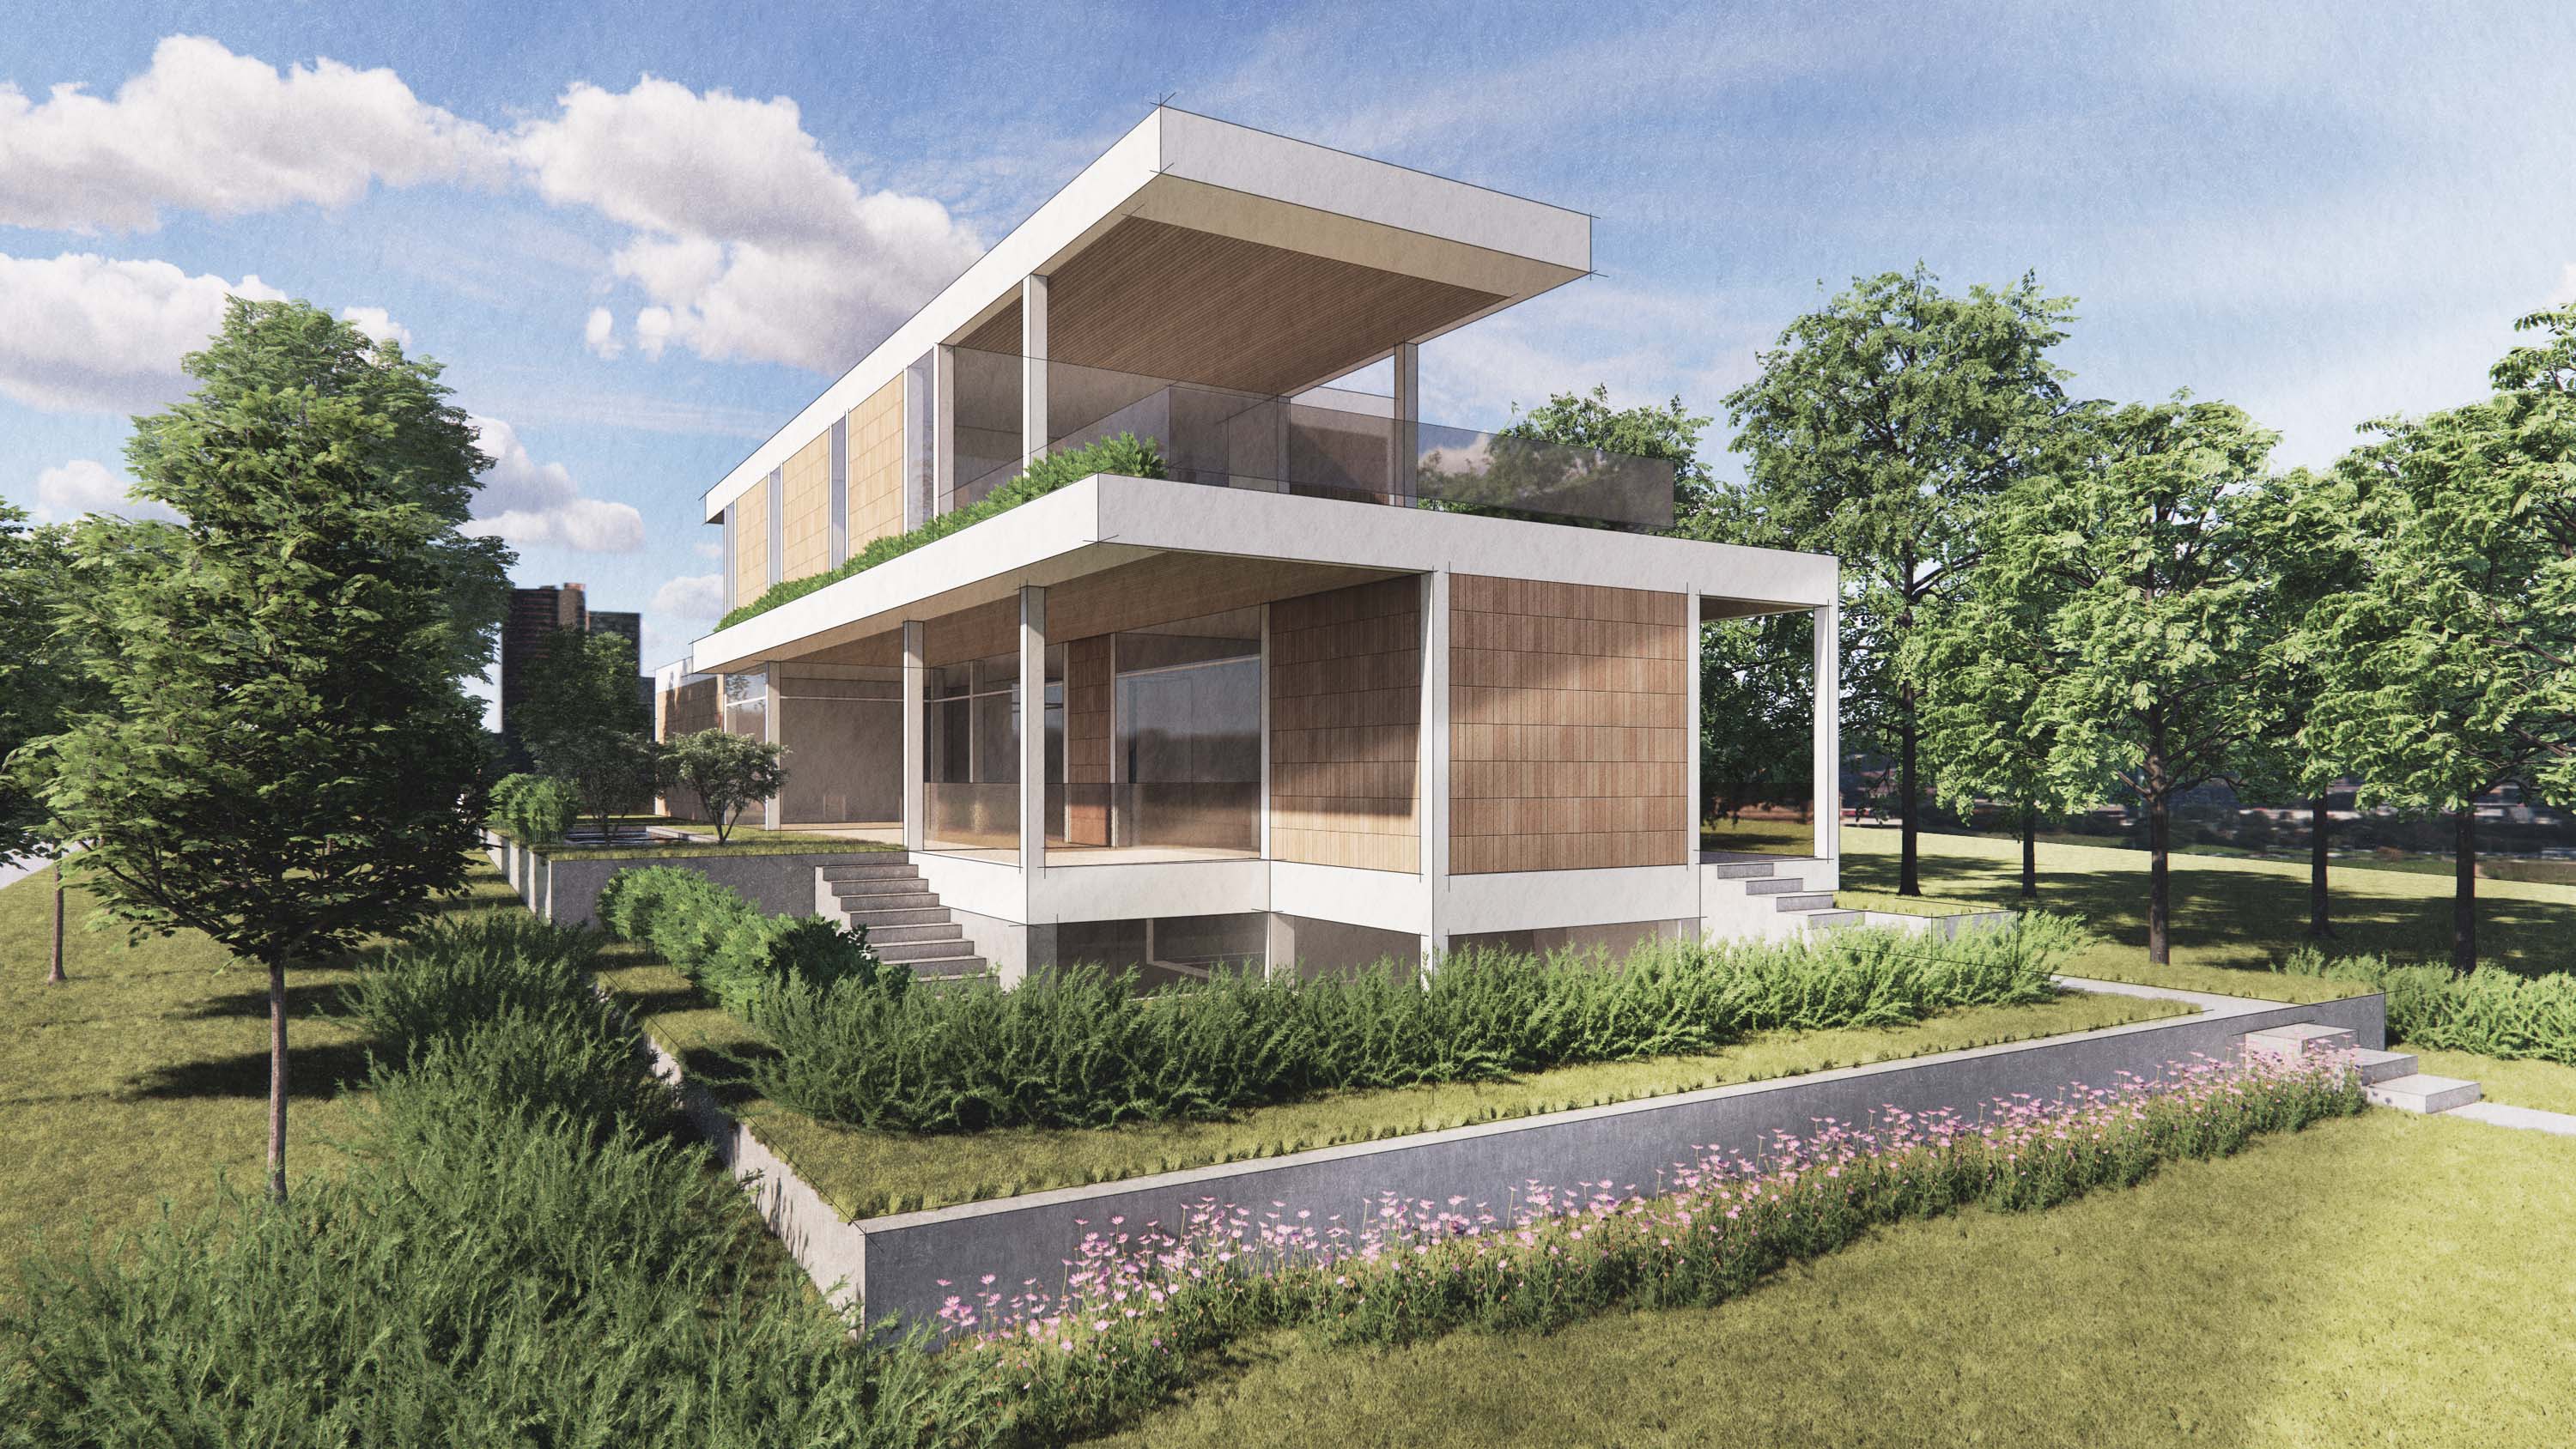 Exterior rendering showcasing the exposed structural frame filled with panels of glass and terracotta tile of the Jewell House by Specht Novak Architects.